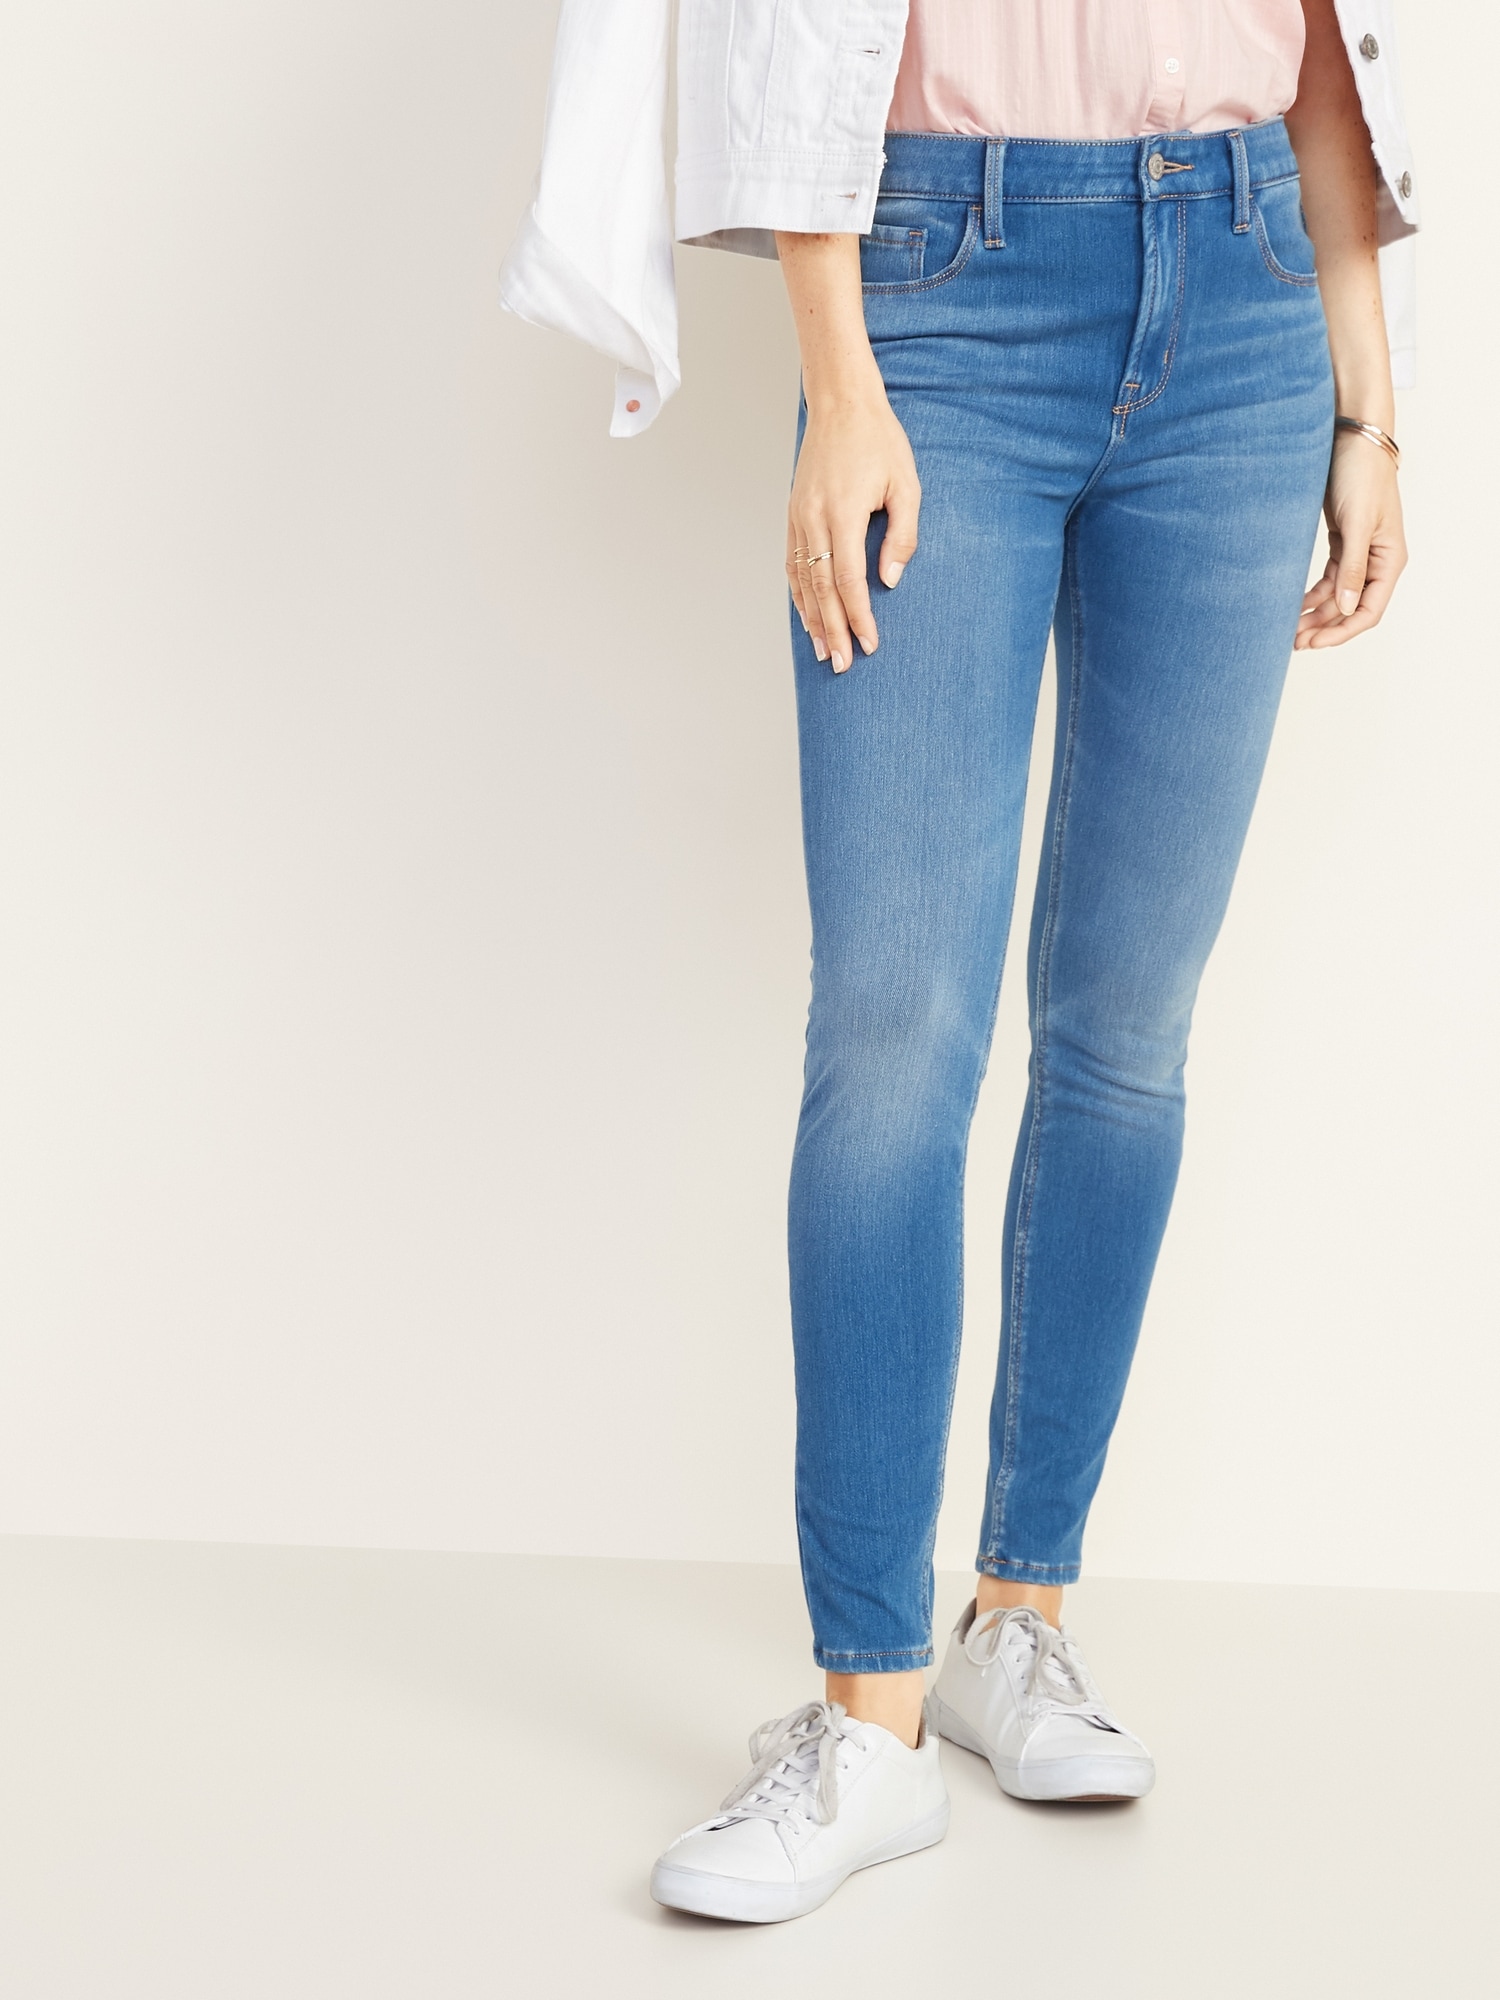 women's high waisted skinny jeans